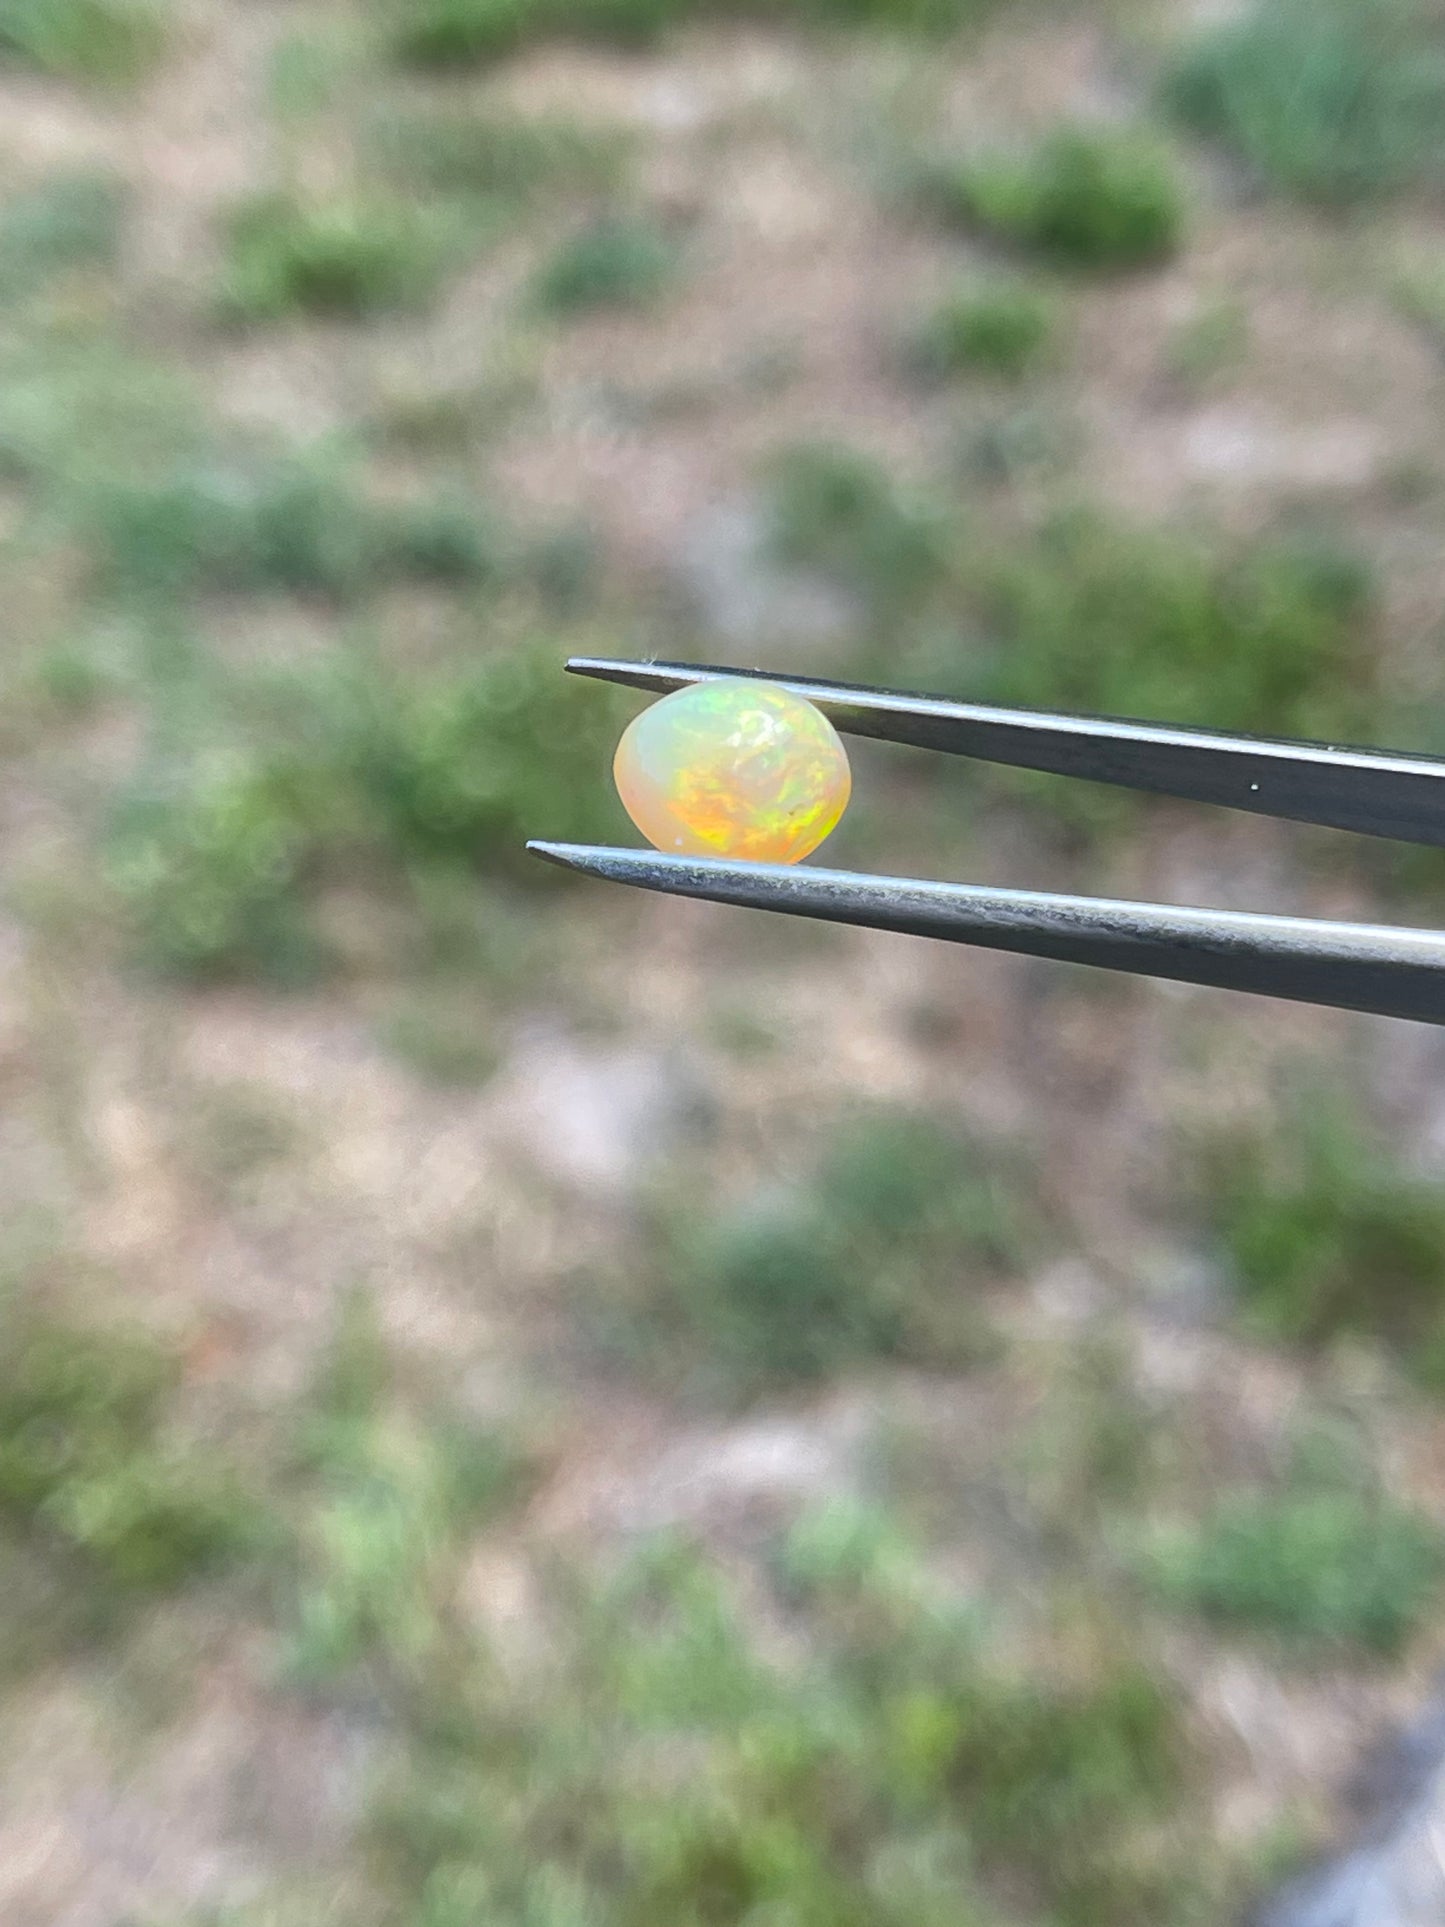 3.14 Carat Natural Ethiopian Opal Cabochon Cut Loose Gemstone with Vibrant Fire